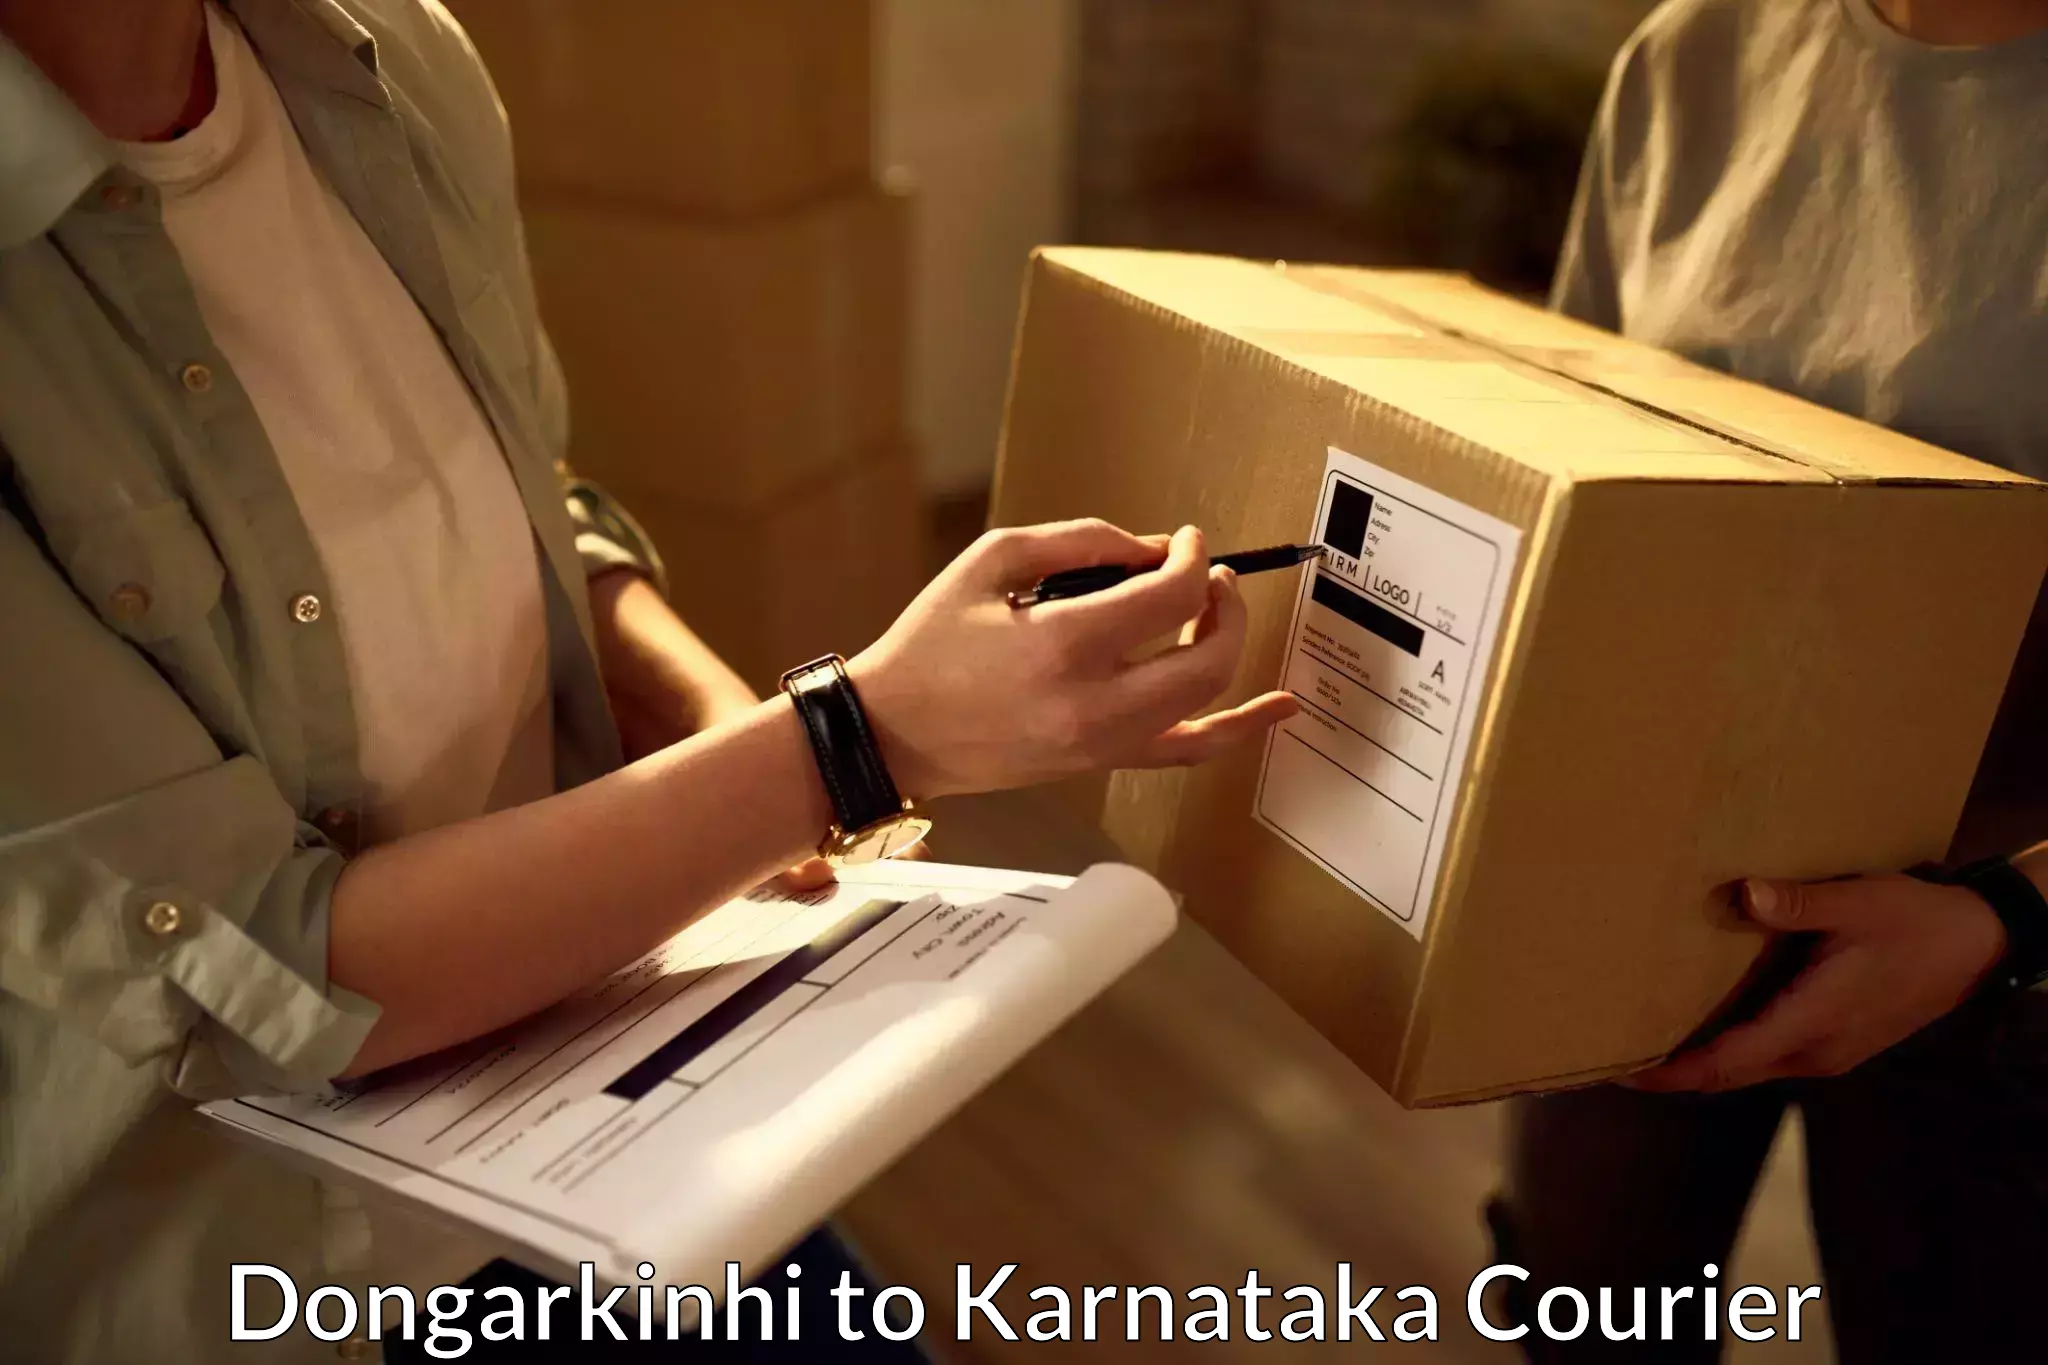 Special handling courier Dongarkinhi to Manipal Academy of Higher Education